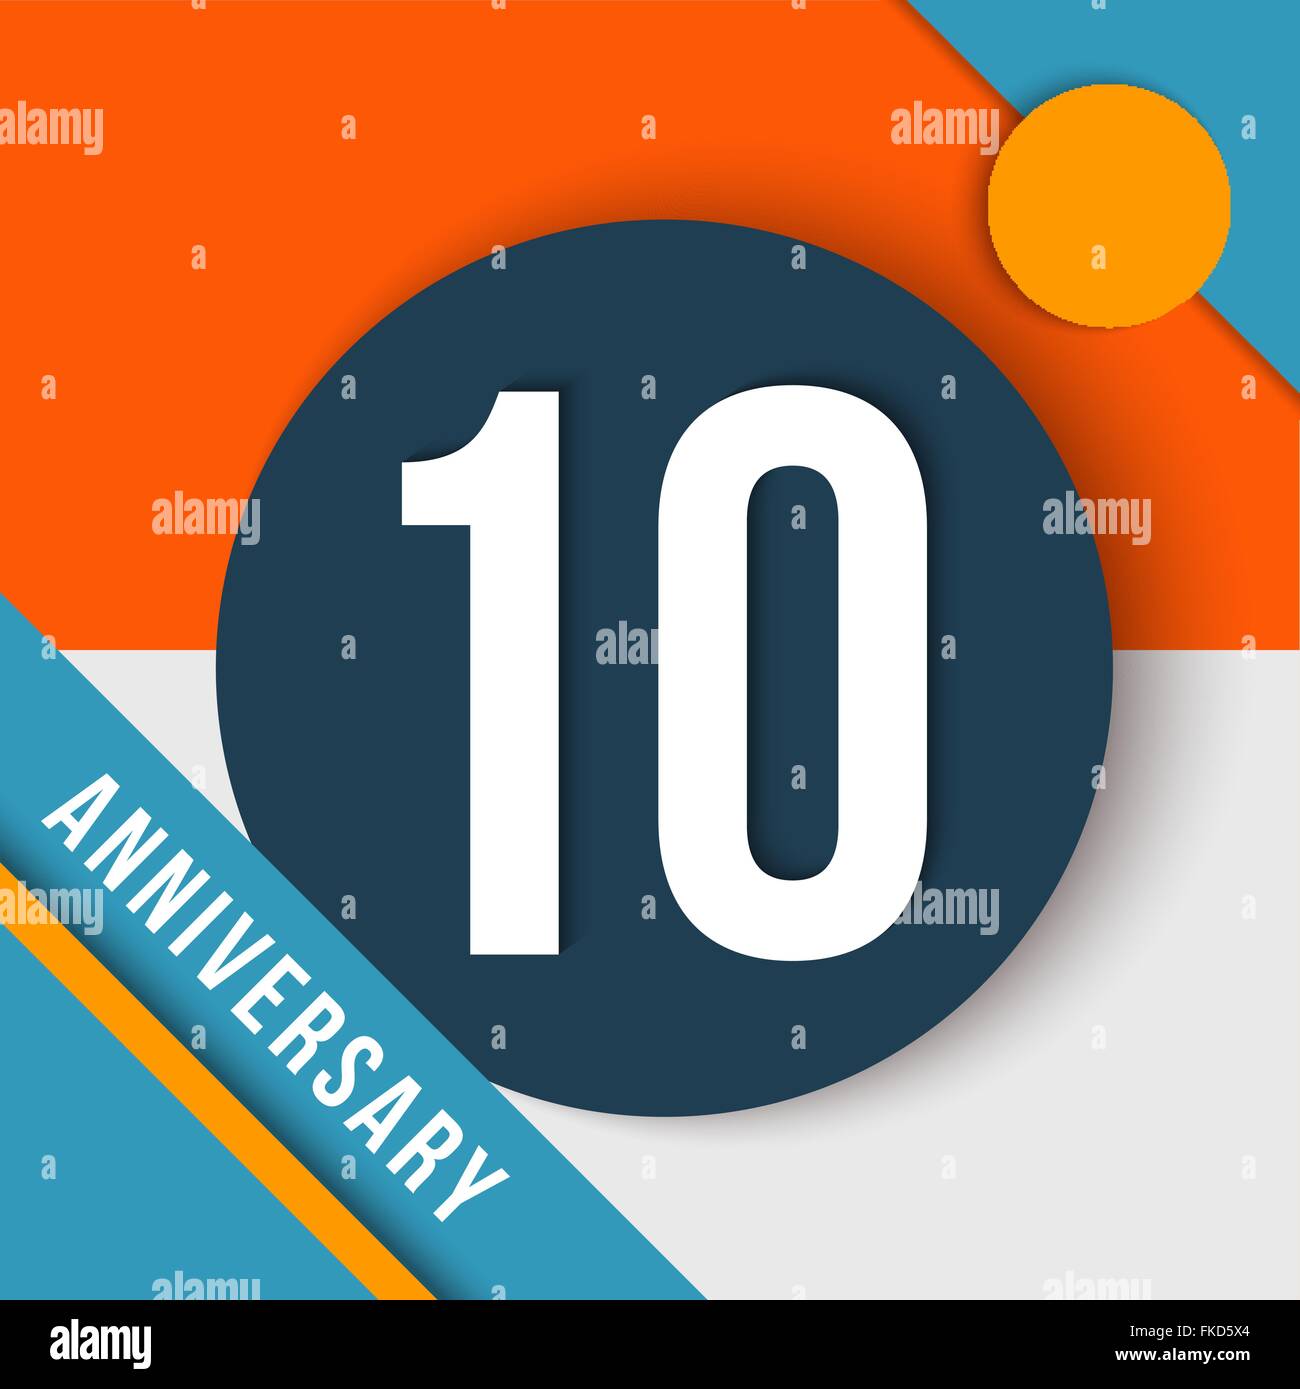 10 ten year anniversary modern concept with number, text label and abstract shapes in material design style. EPS10 vector. Stock Vector